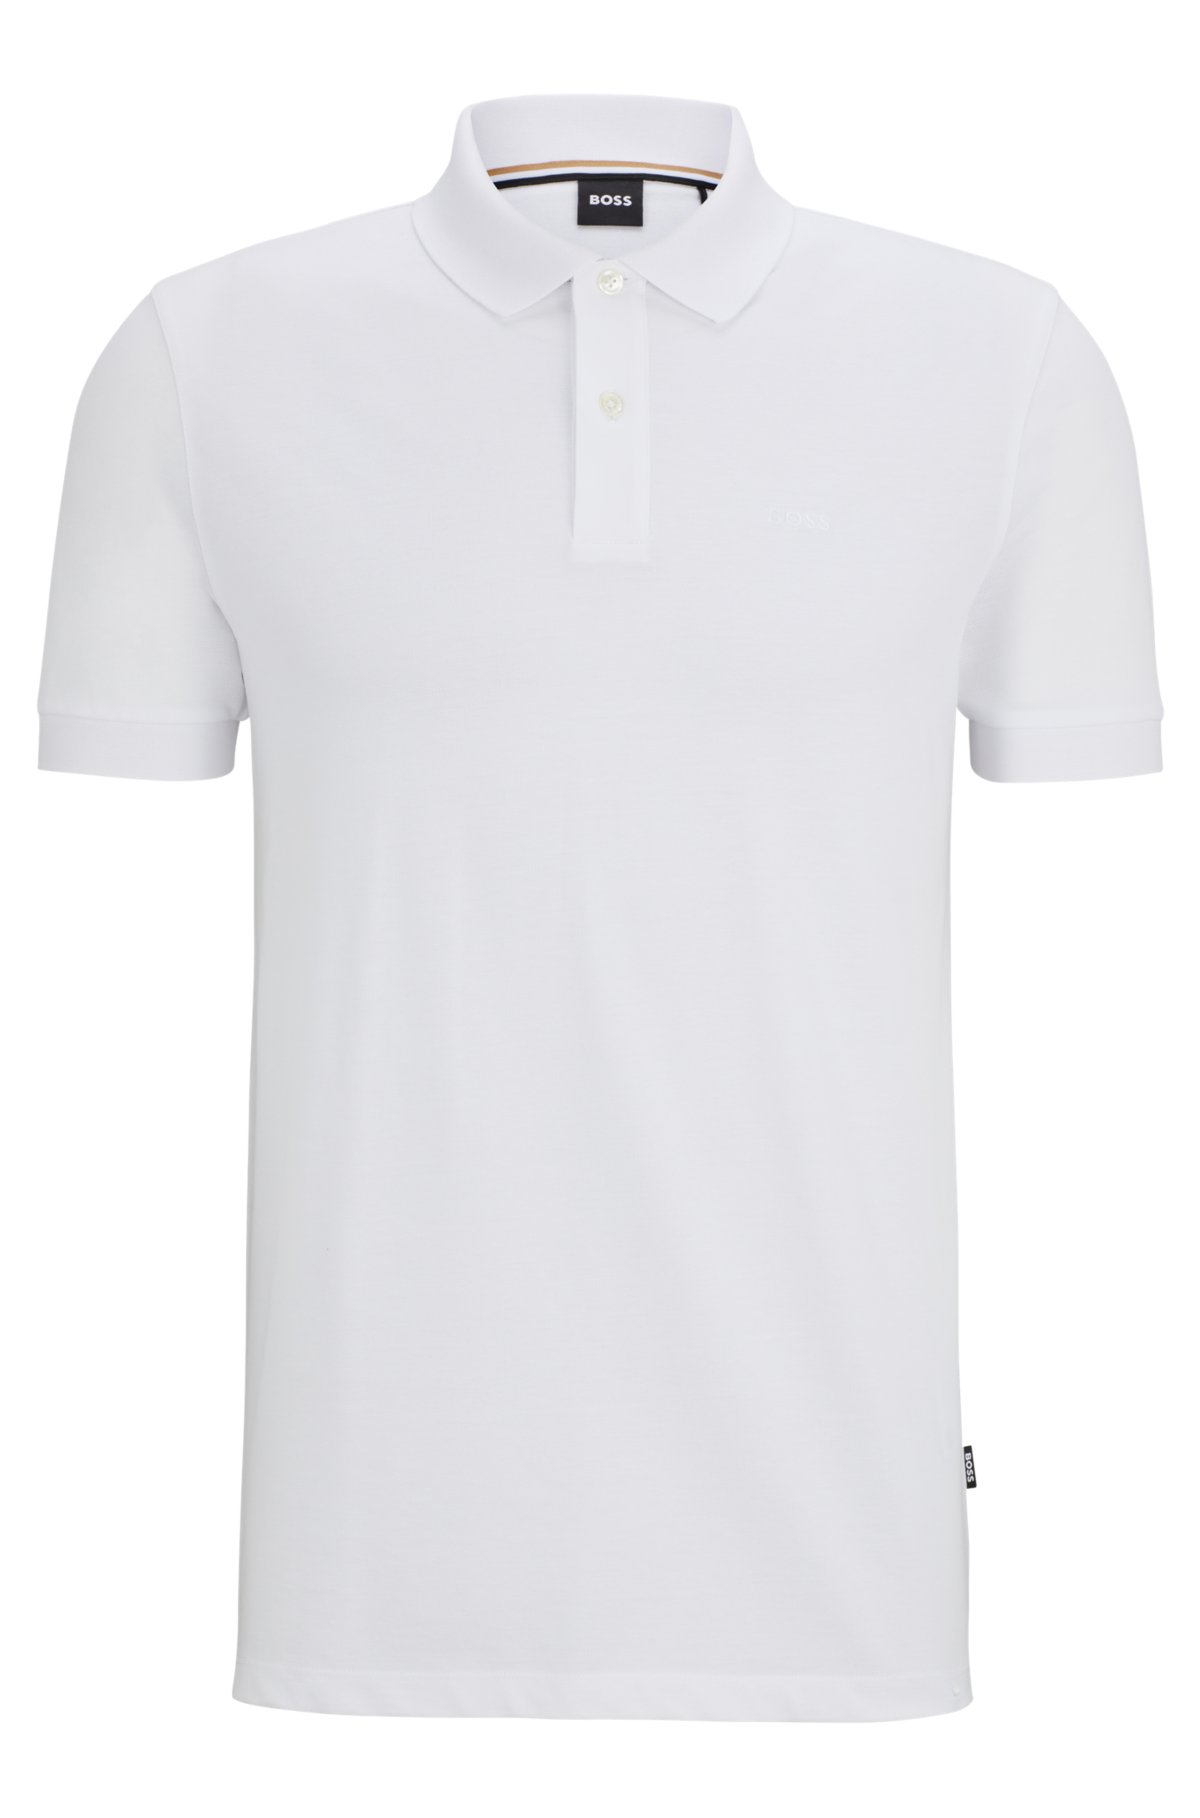 BOSS embroidered logo Polo - shirt with